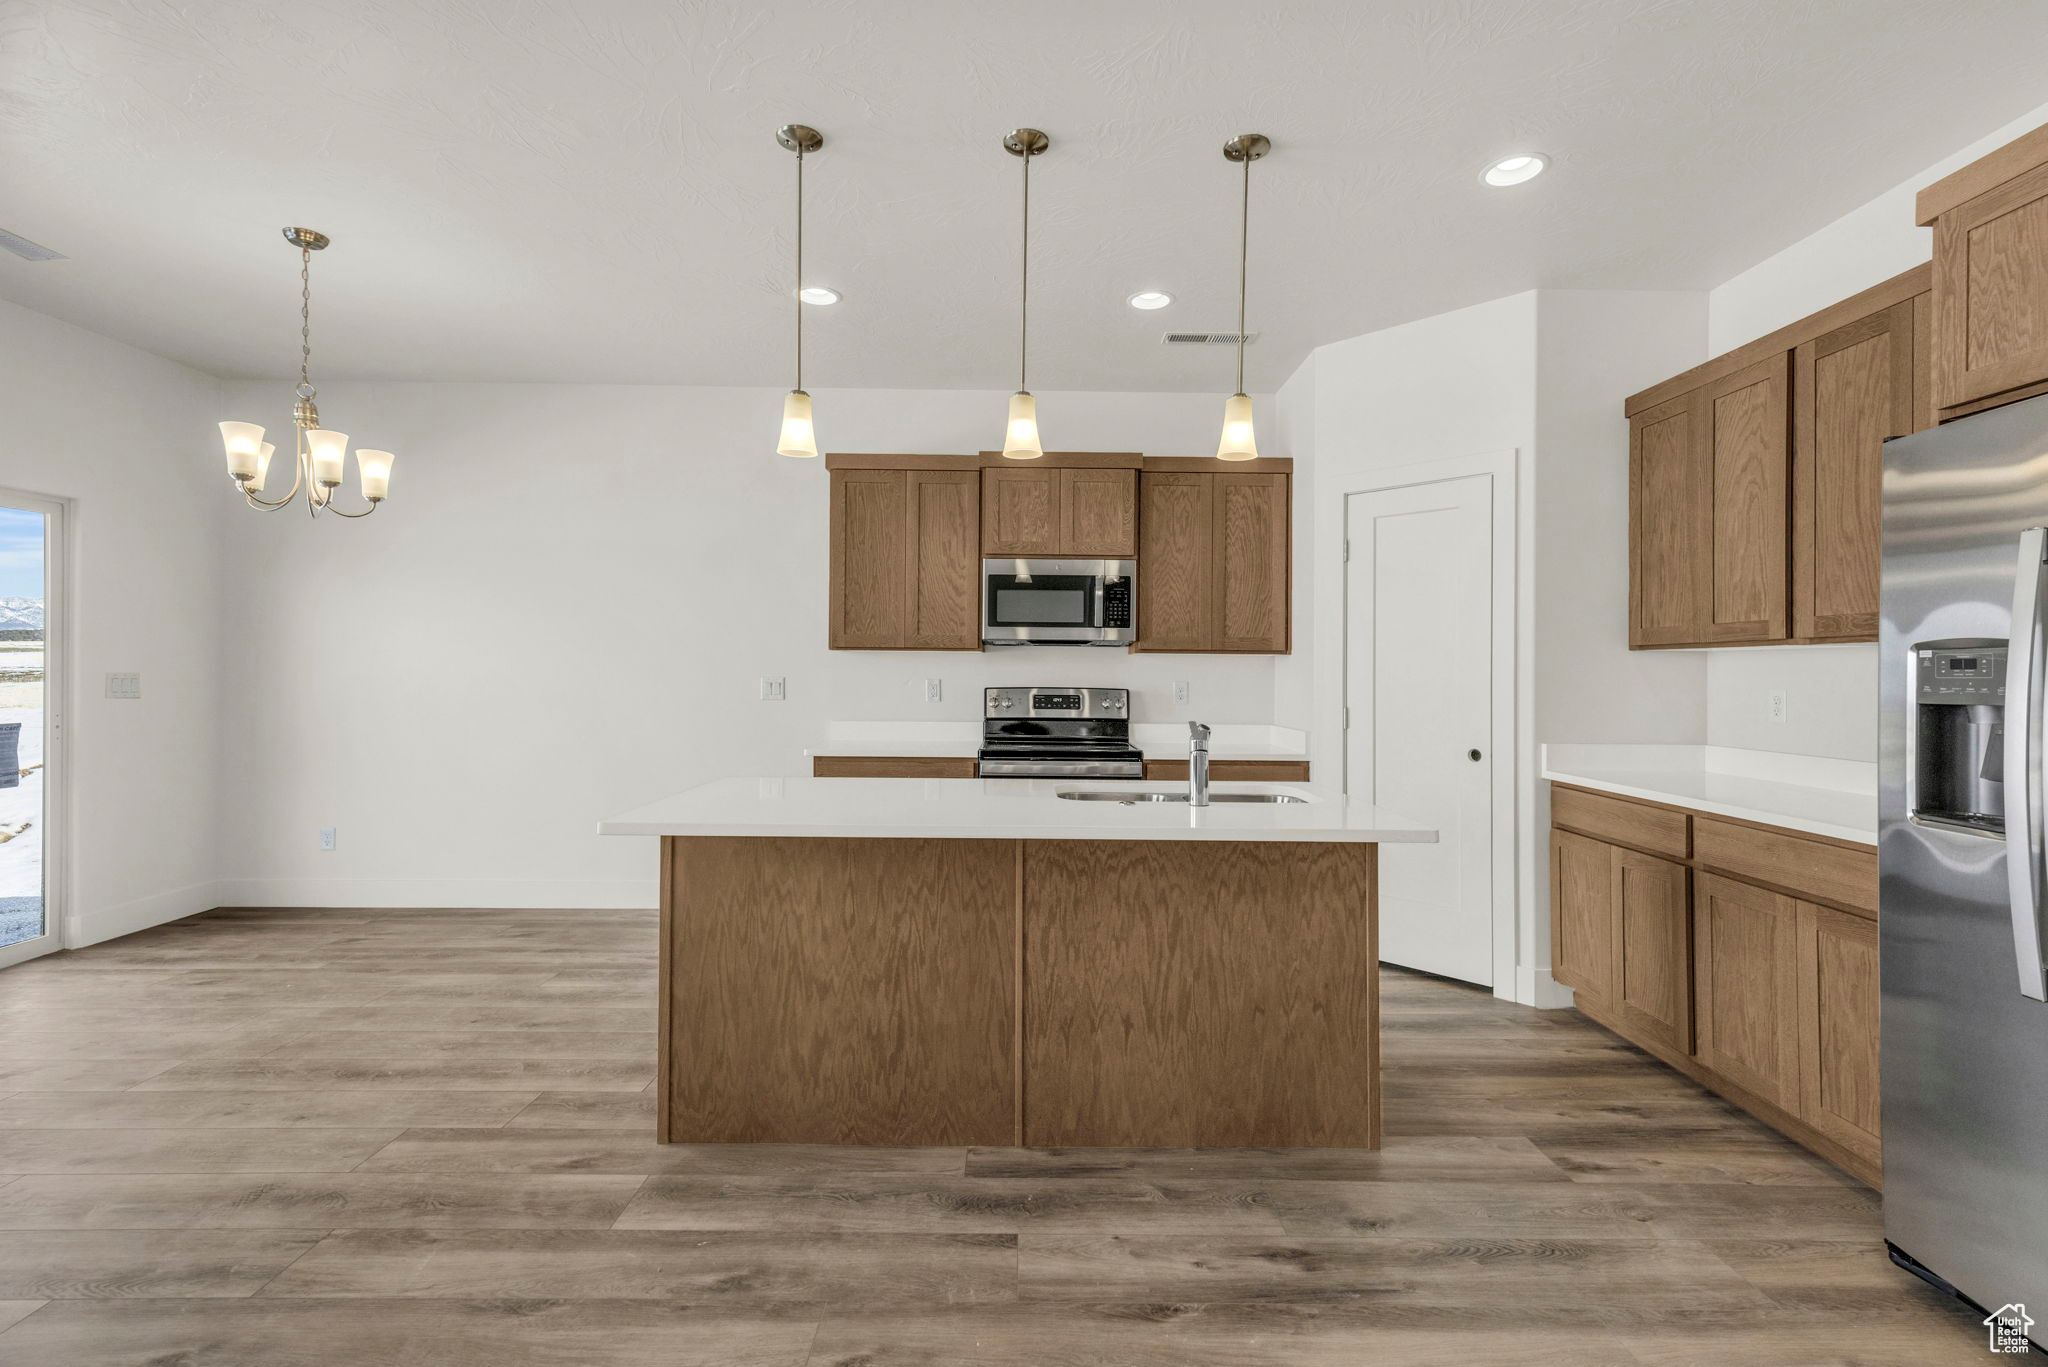 Kitchen with light hardwood / wood-style flooring, a center island with sink, stainless steel appliances, pendant lighting, and a chandelier